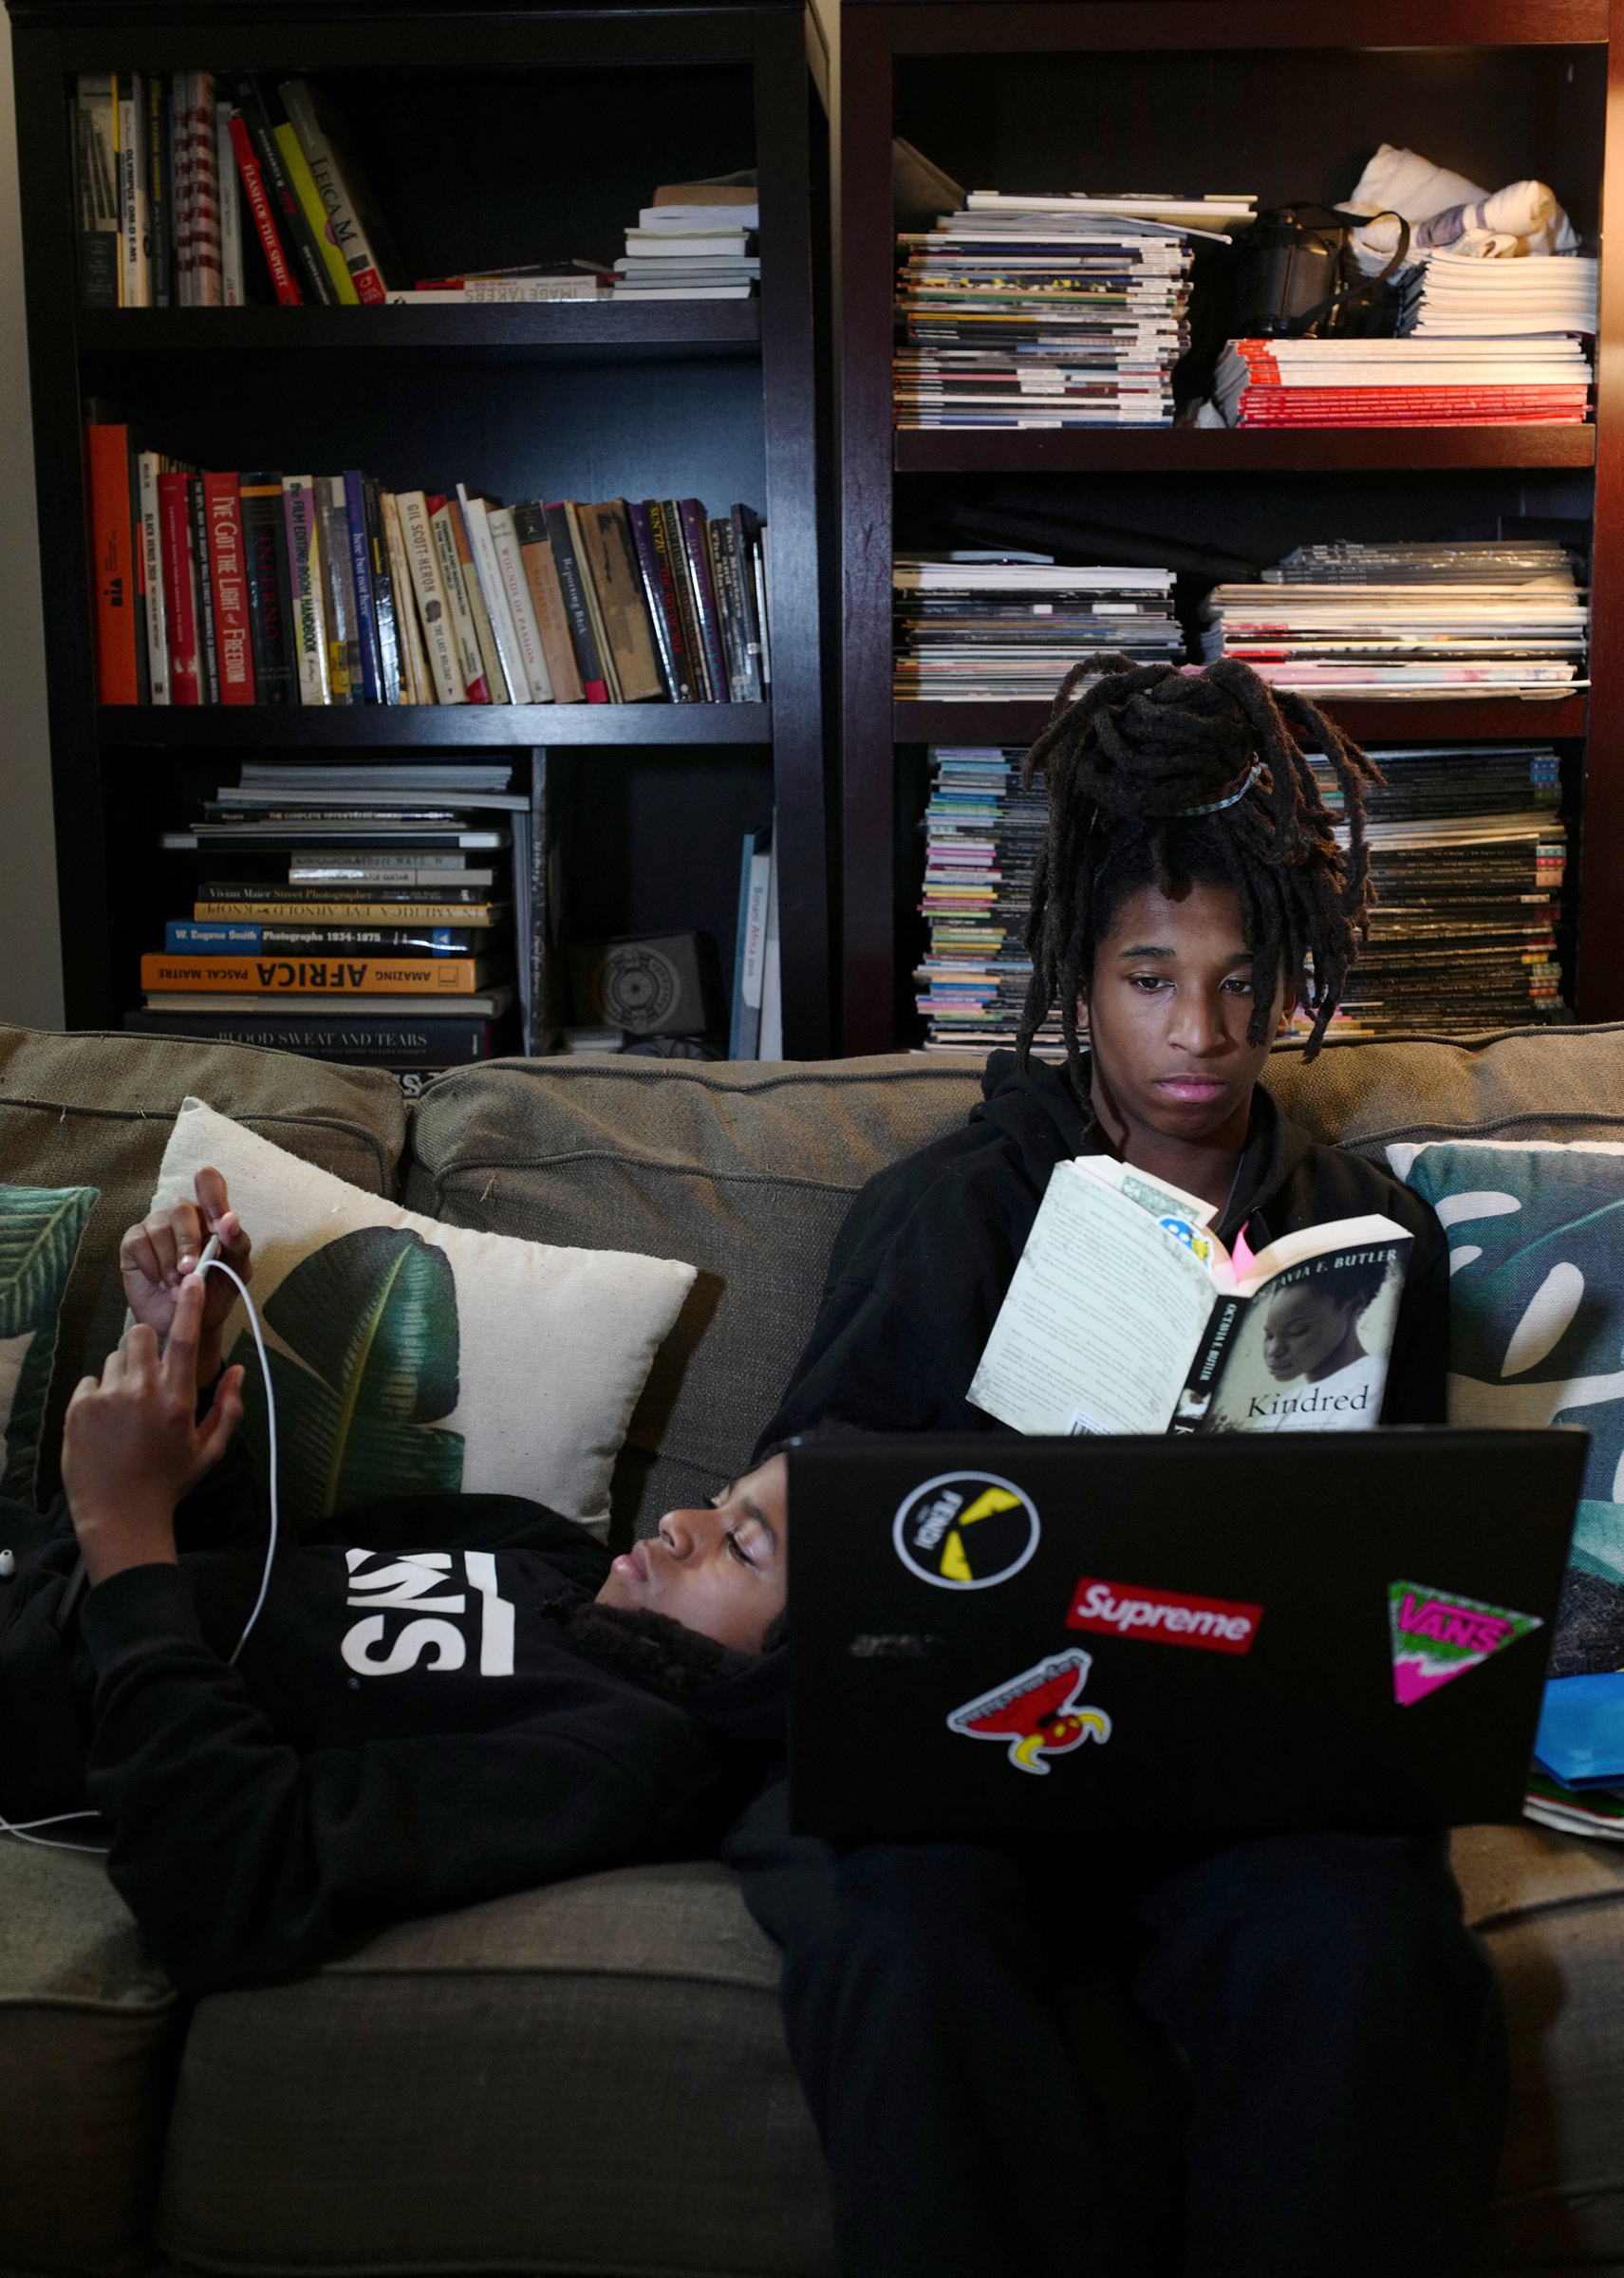 Mosijah Roye, 15, right, and Iyeoshujah, 11, the photographer’s sons, follow online classes in New York on March 23 on their home devices